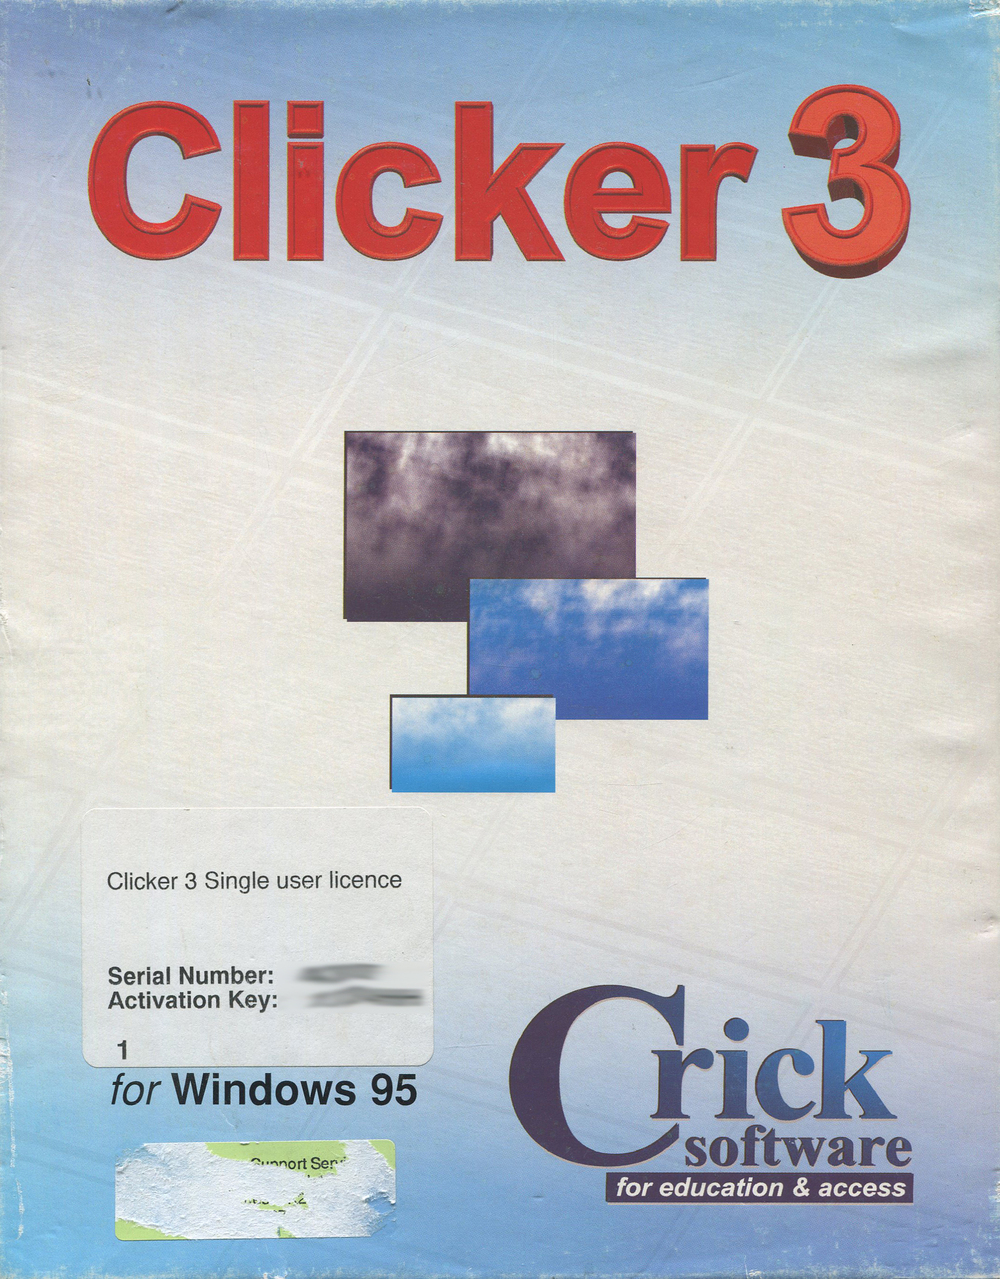 Clicker from Crick Software